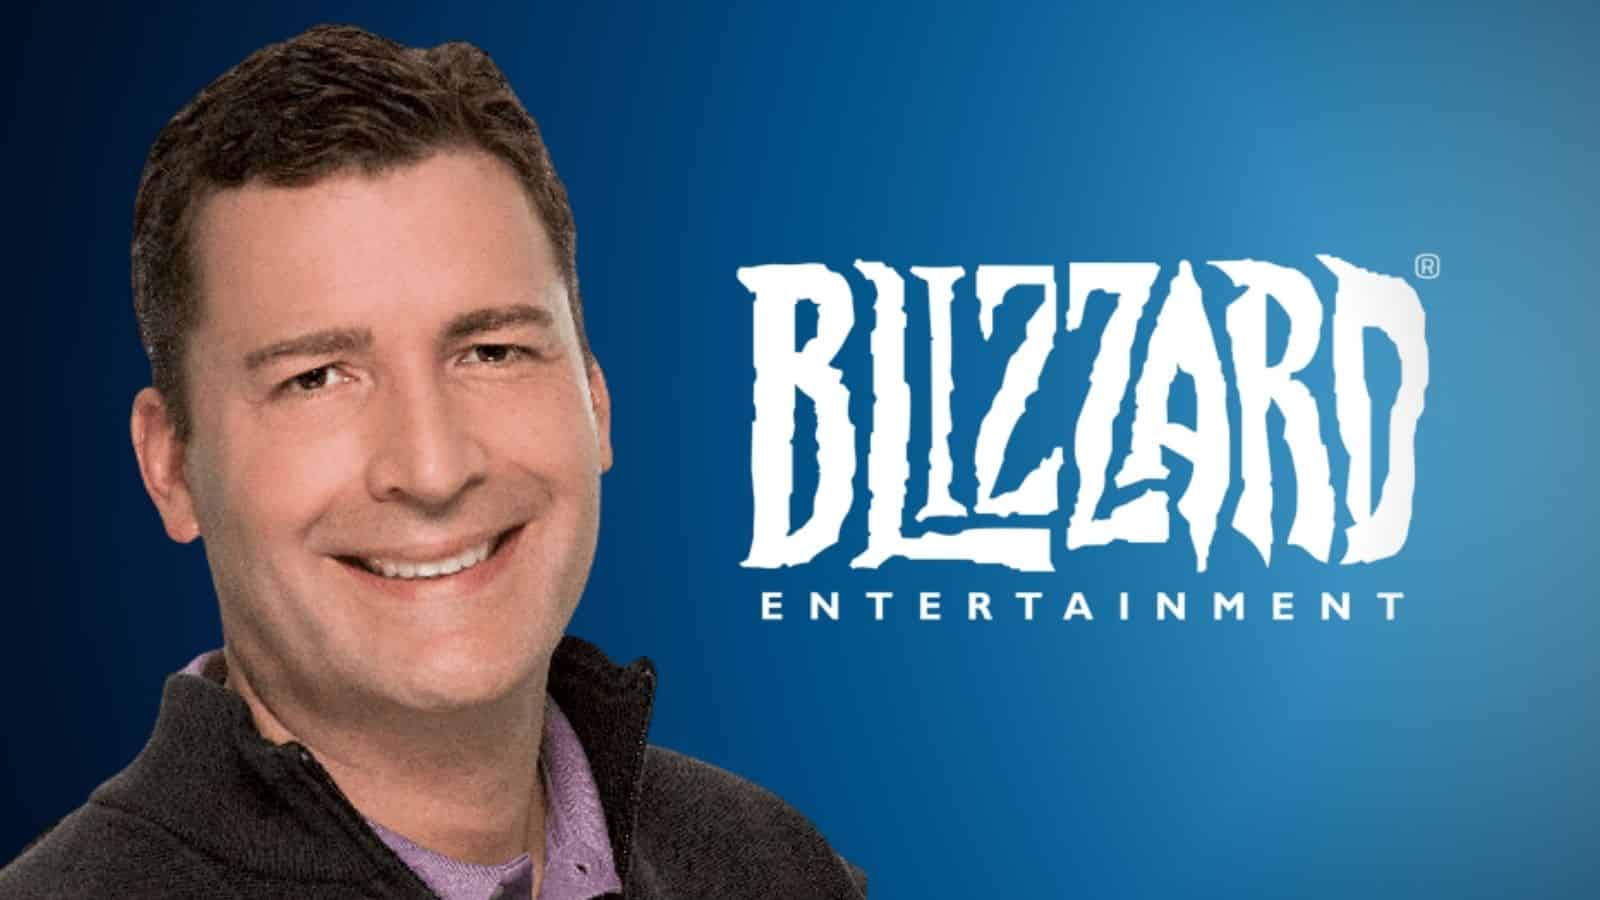 Blizzard’s Mike Ybarra Shares Letter With the Community Saying They Are Working to Rebuild Trust